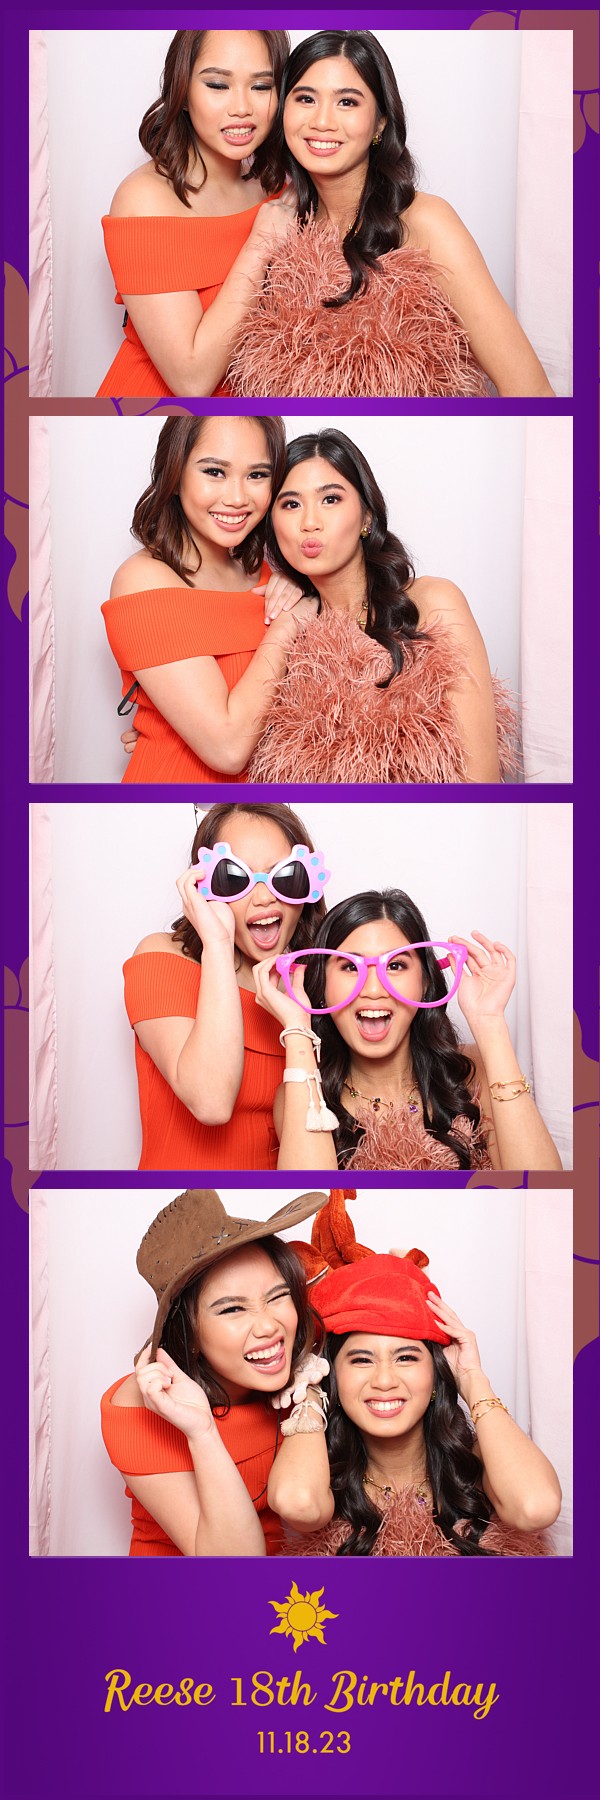 Reese’s 18th Birthday – Vintage Booth